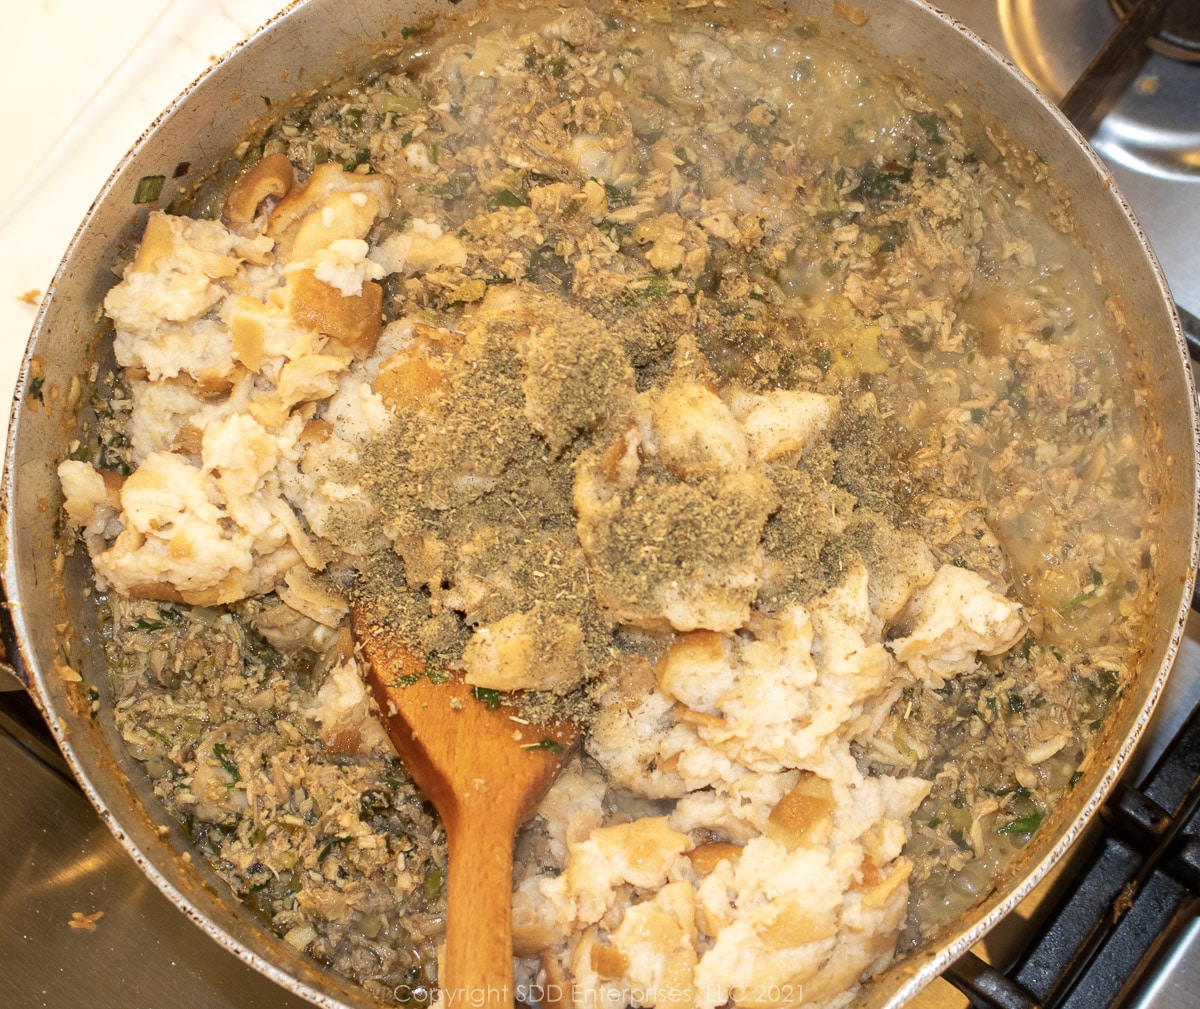 soaked stale bread and sage added to dressing mixture in a stock pot